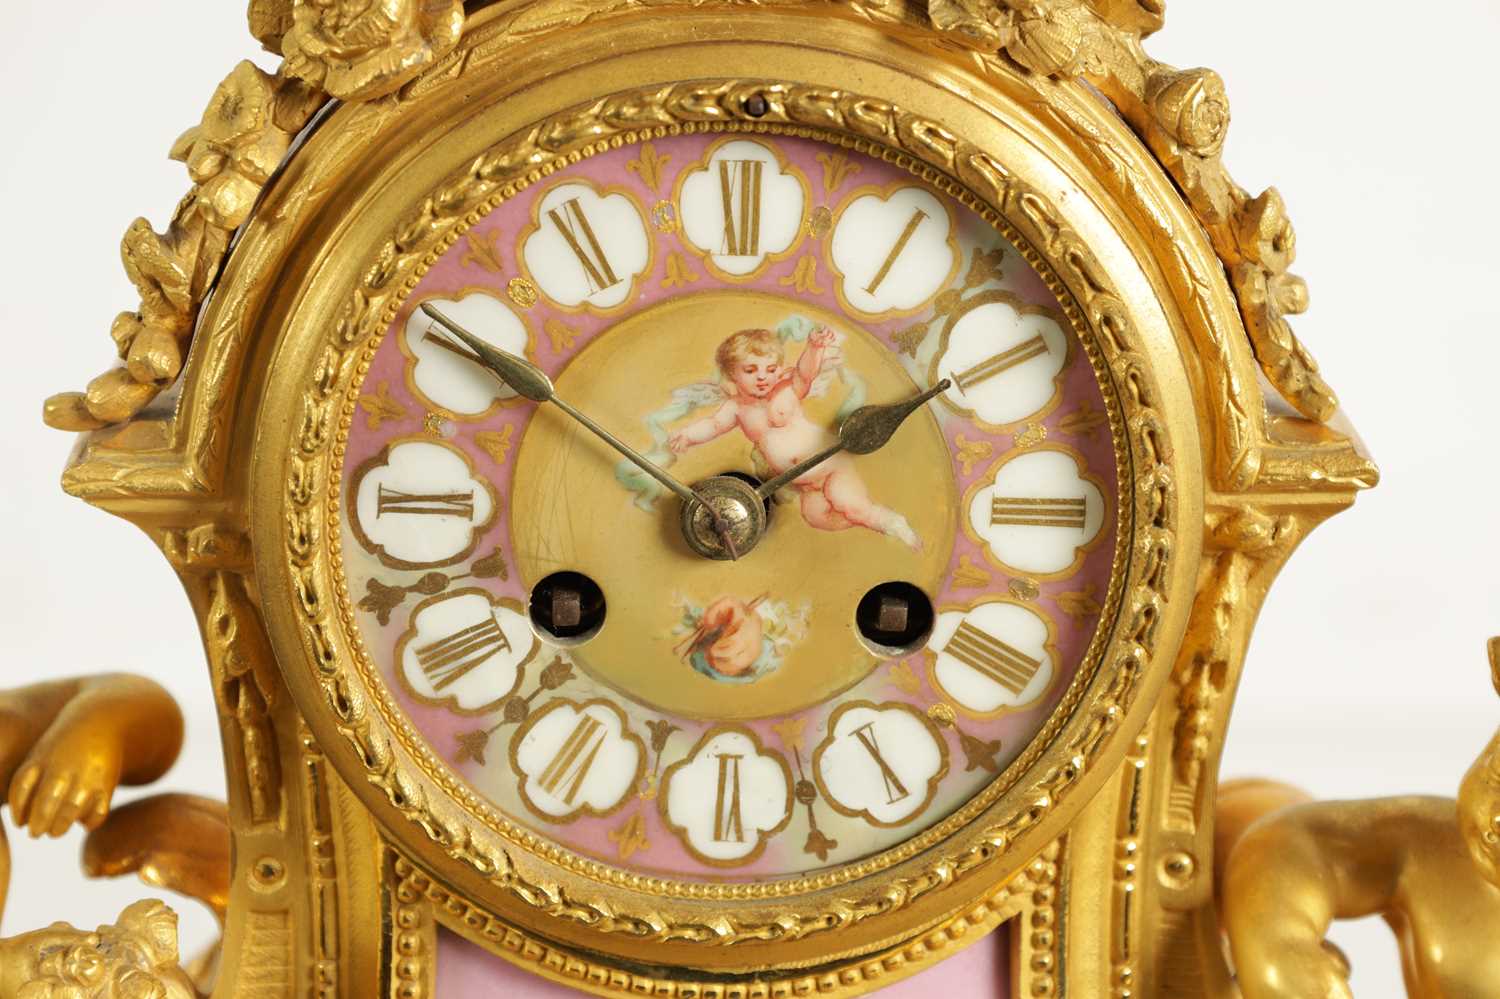 A LATE 19TH CENTURY FRENCH ORMOLU AND PORCELAIN PANELLED FIGURAL MANTEL CLOCK - Image 2 of 12